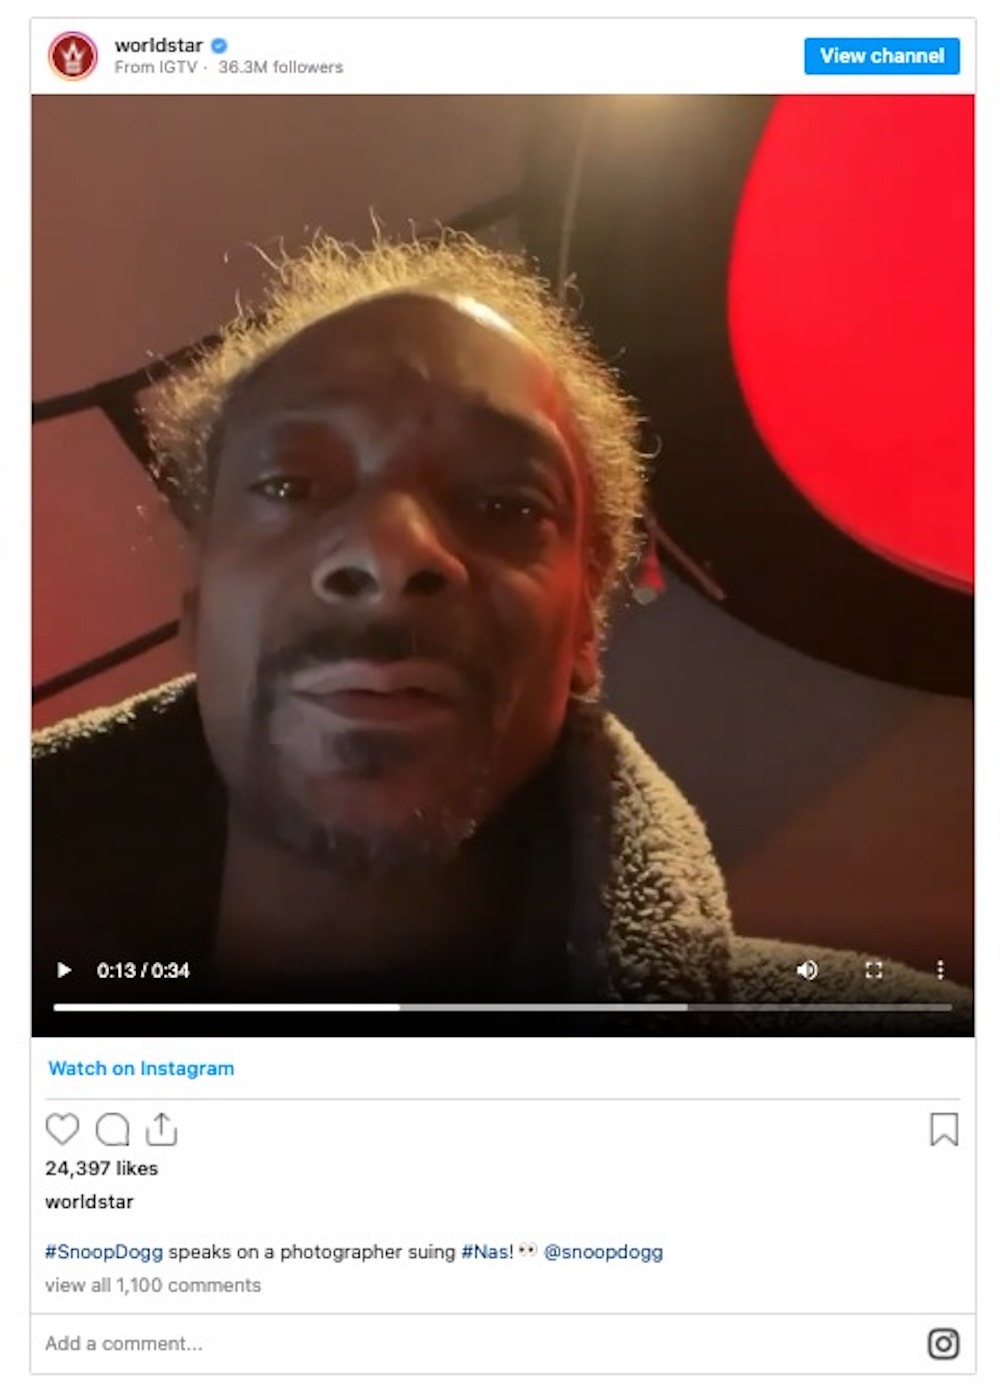 Snoop Dogg pictured during his Instagram rant about the copyright of images of celebrities